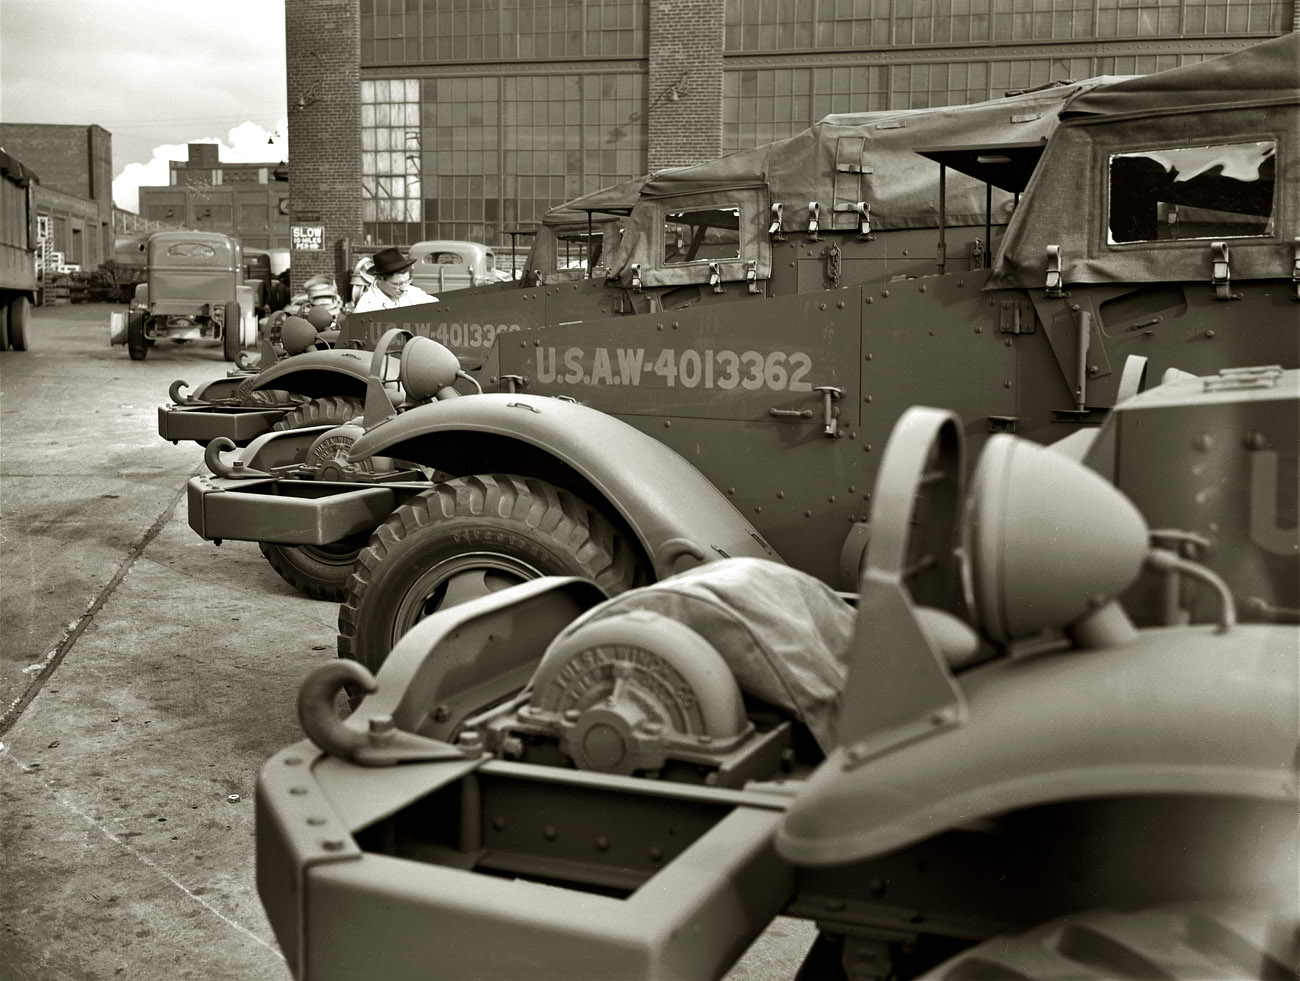 December 1941. White Motor Company, Cleveland. "Halftrac scout cars ready for the Army except for the addition of certain pieces of Army equipment. The cars as they stand in the yard of a Midwest manufacturer are ready for combat duty." View full size. 4x5 negative by Alfred Palmer for the Office of War Information.